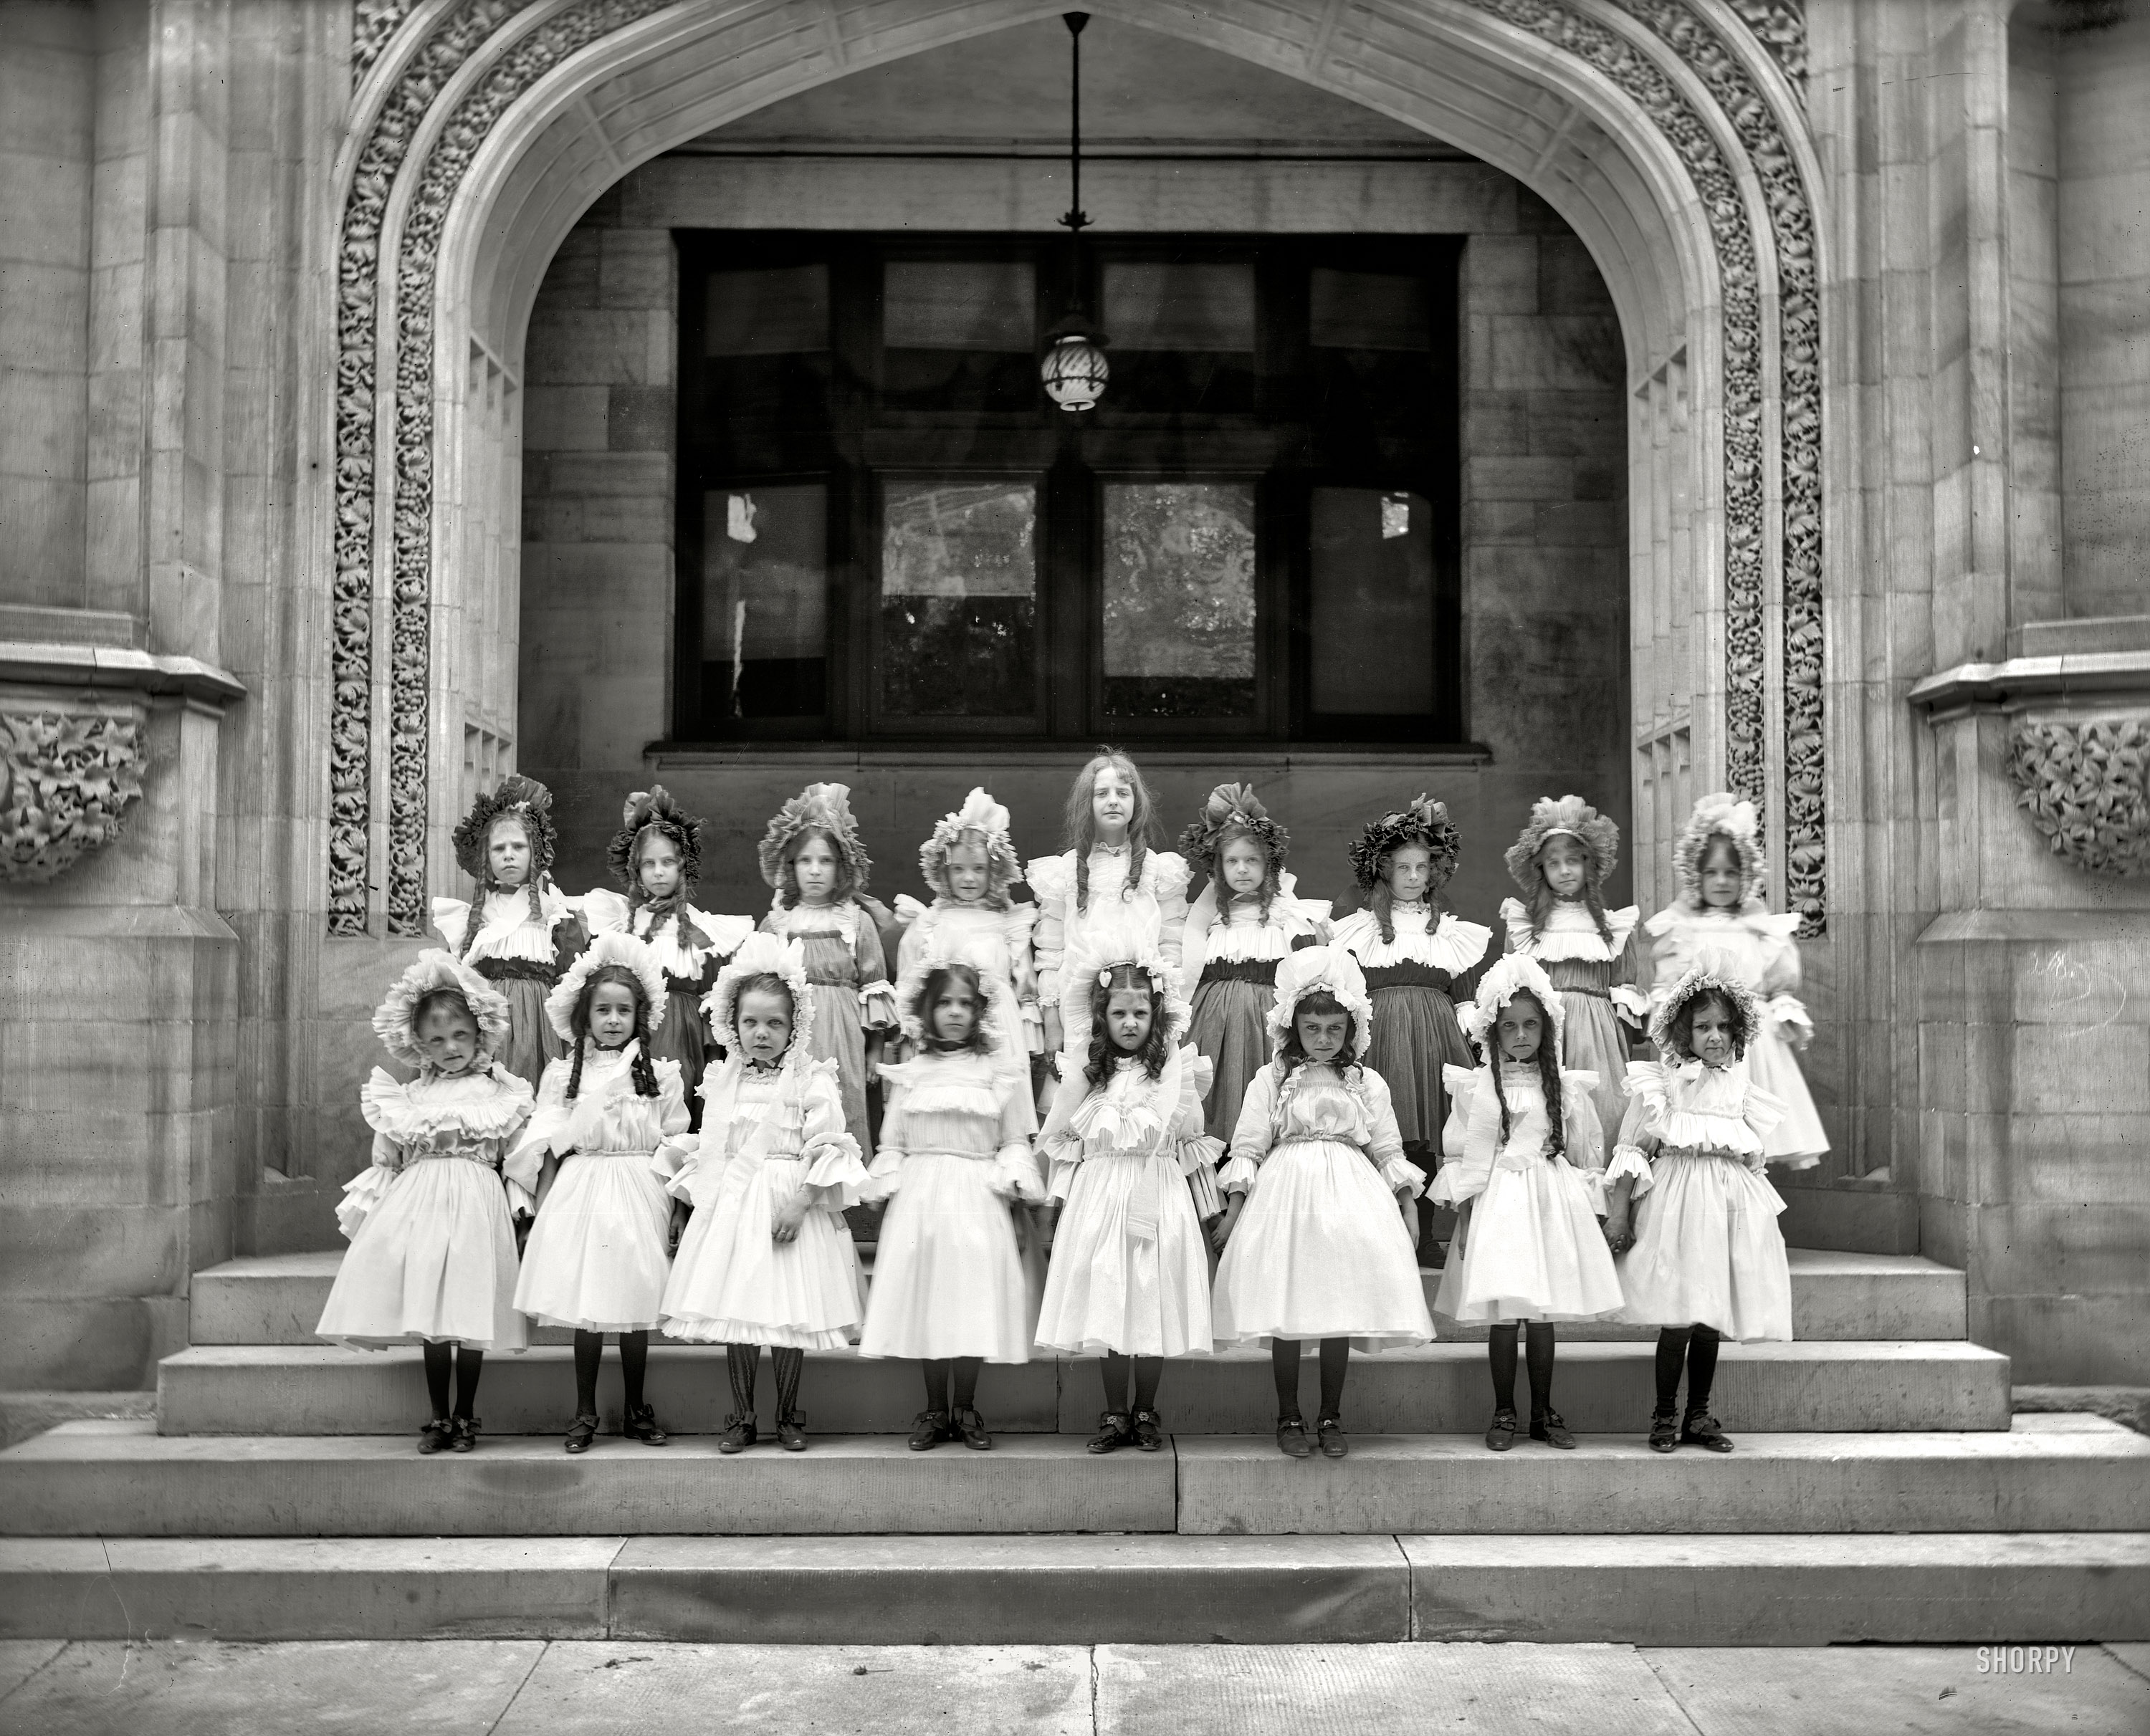 Circa 1905. "Schoolgirls." Our second group portrait taken at this undisclosed location. A mute choral recital hitting all the notes on the scale of emotions between embarrassed and mortified. Detroit Publishing Co. View full size. UPDATE: This is the Saints Peter and Paul Academy, 64 Parsons St., Detroit.